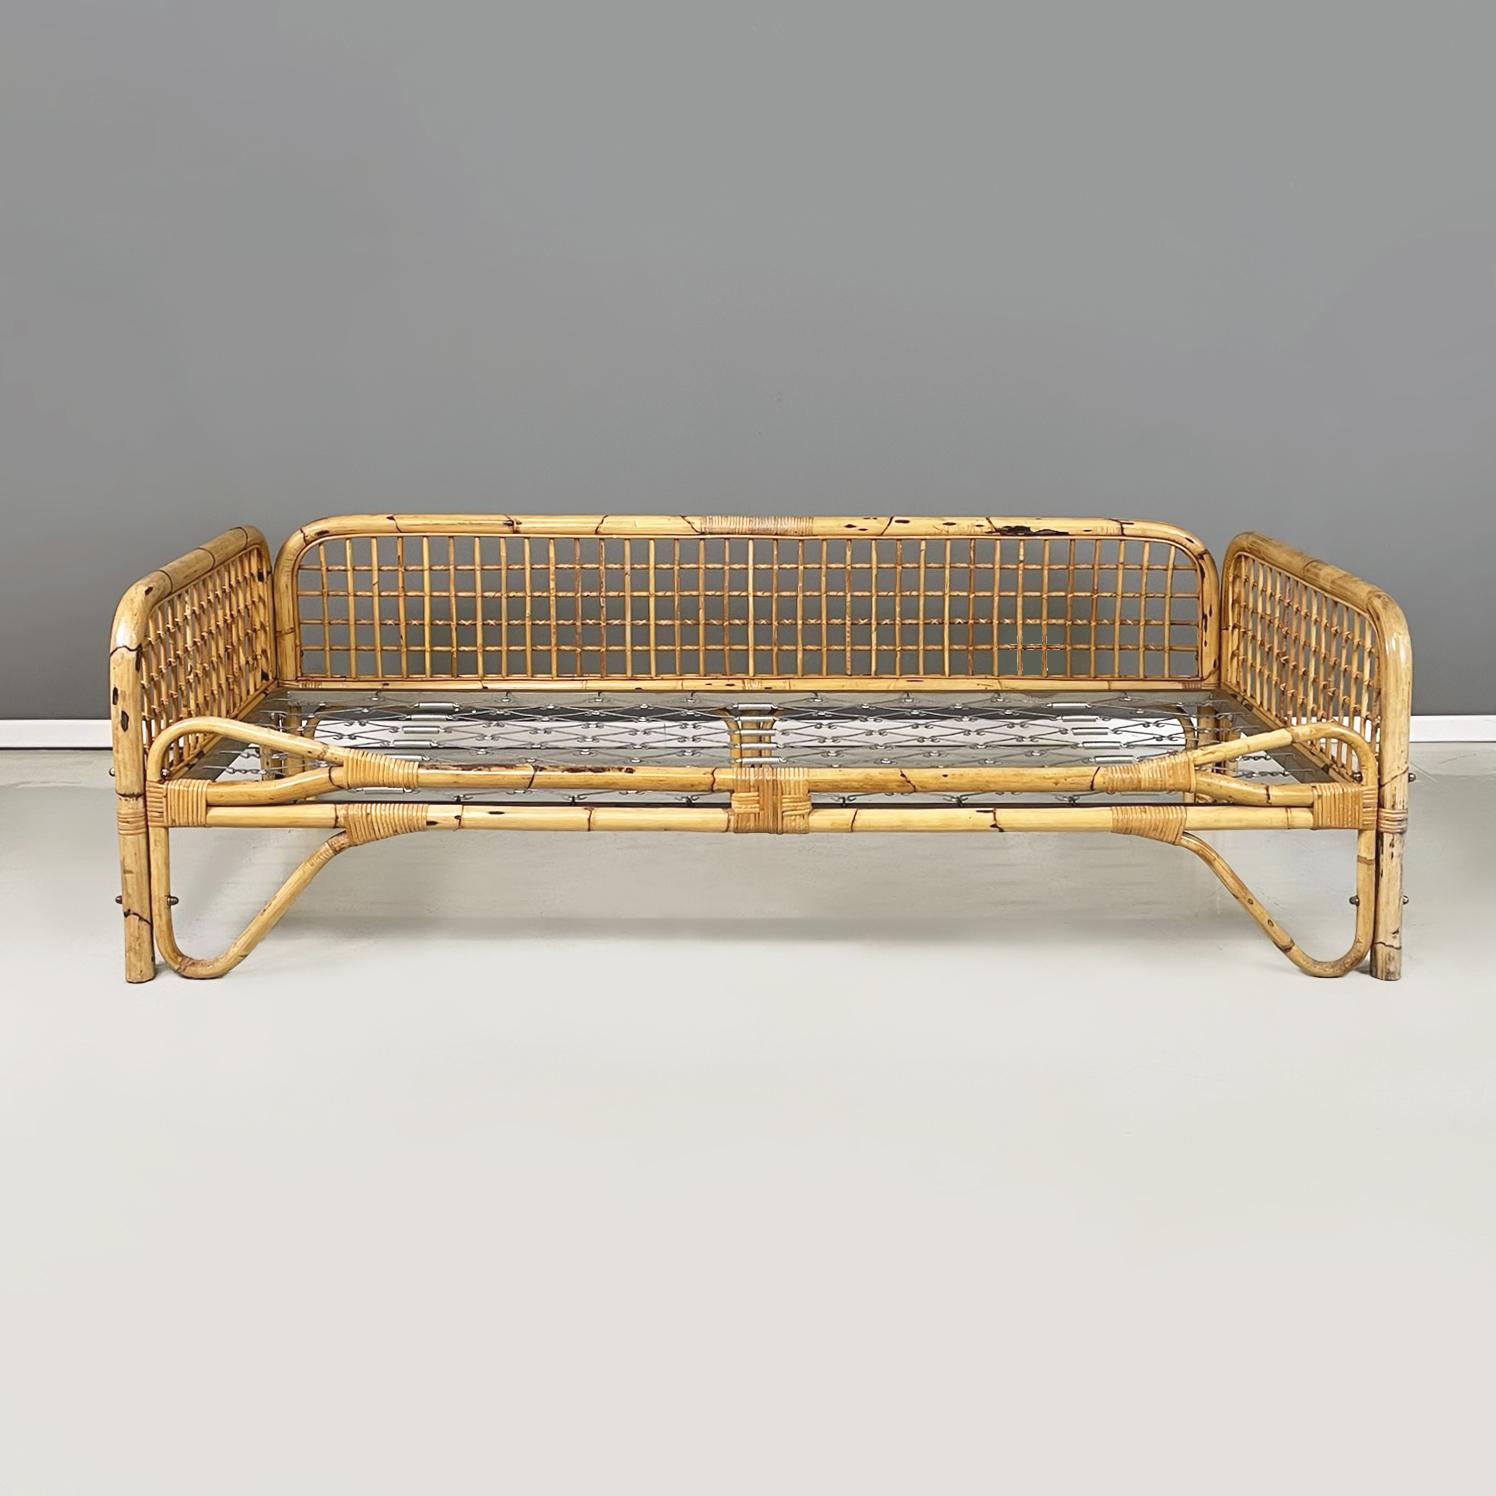 Italian mid-century modern daybed, bed or sofa in rattan and metal mesh, 1970s
Daybed with finely woven rattan structure. The seat is made of a metal mesh, perfect for placing a mattress and making it a bed or an outdoor sofa. Square armrests with